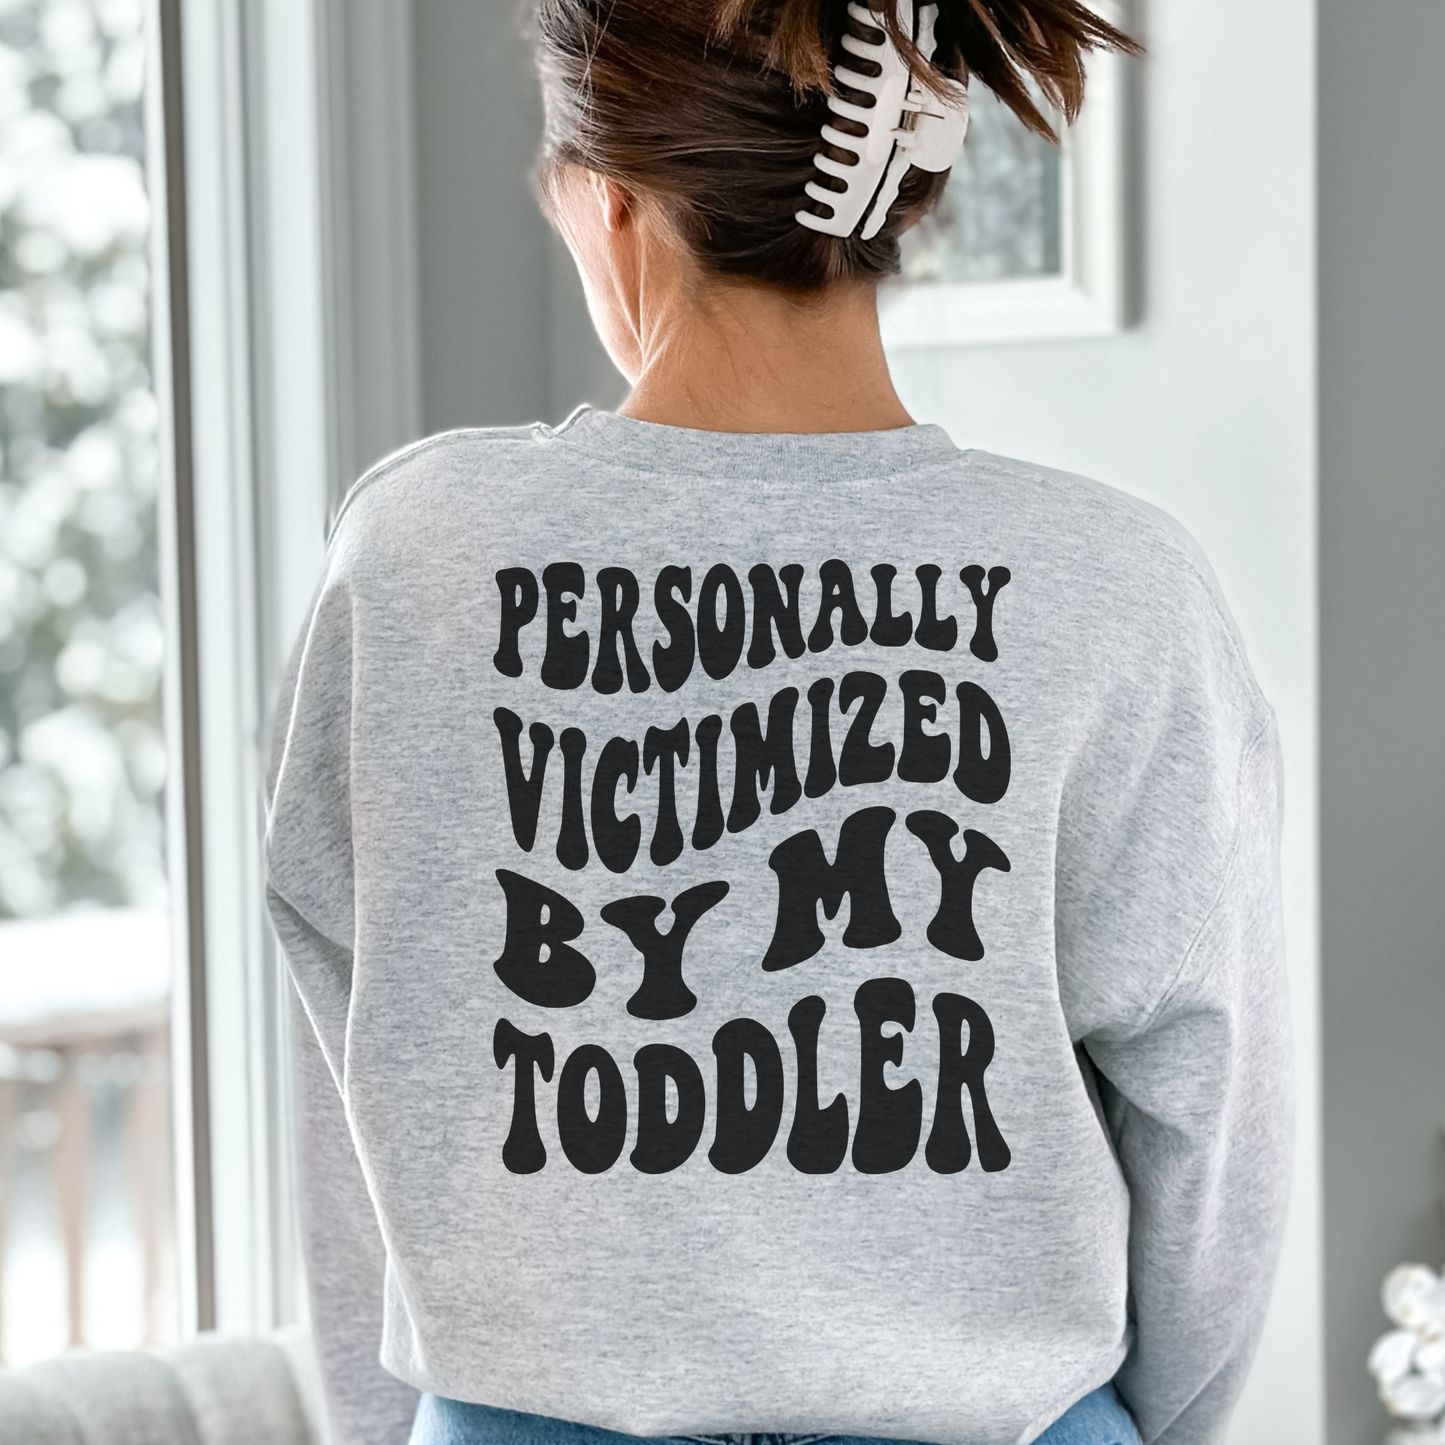 Personally Victimized by my Toddler Crewneck